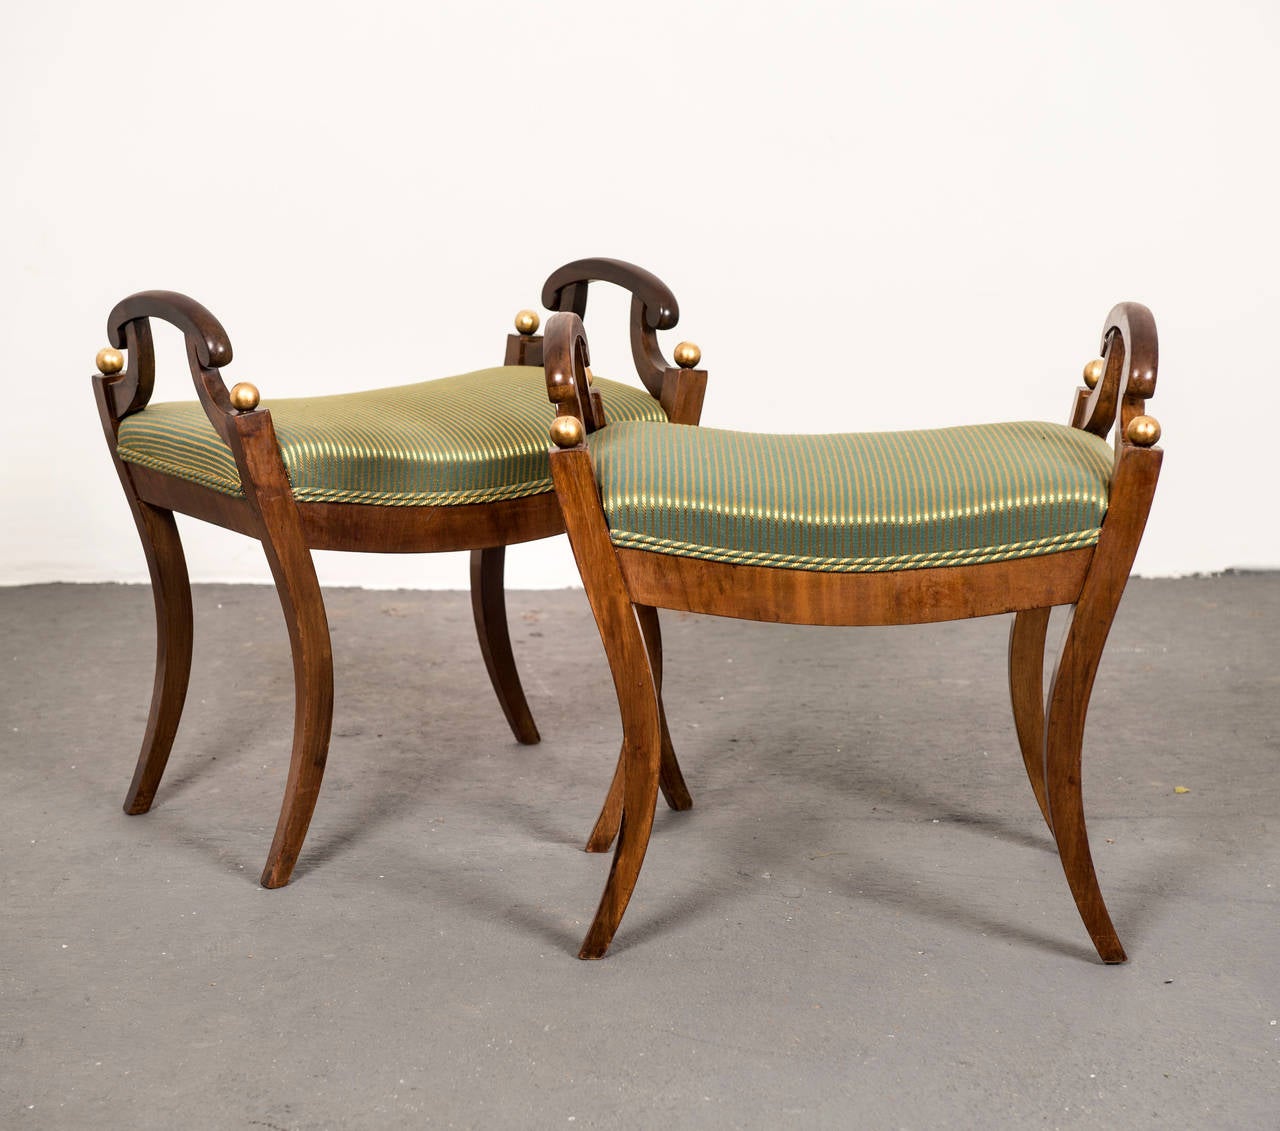 A pair of mahogany benches with a gilded ball detail, made during the Karl Johan period ca 1810-1830.